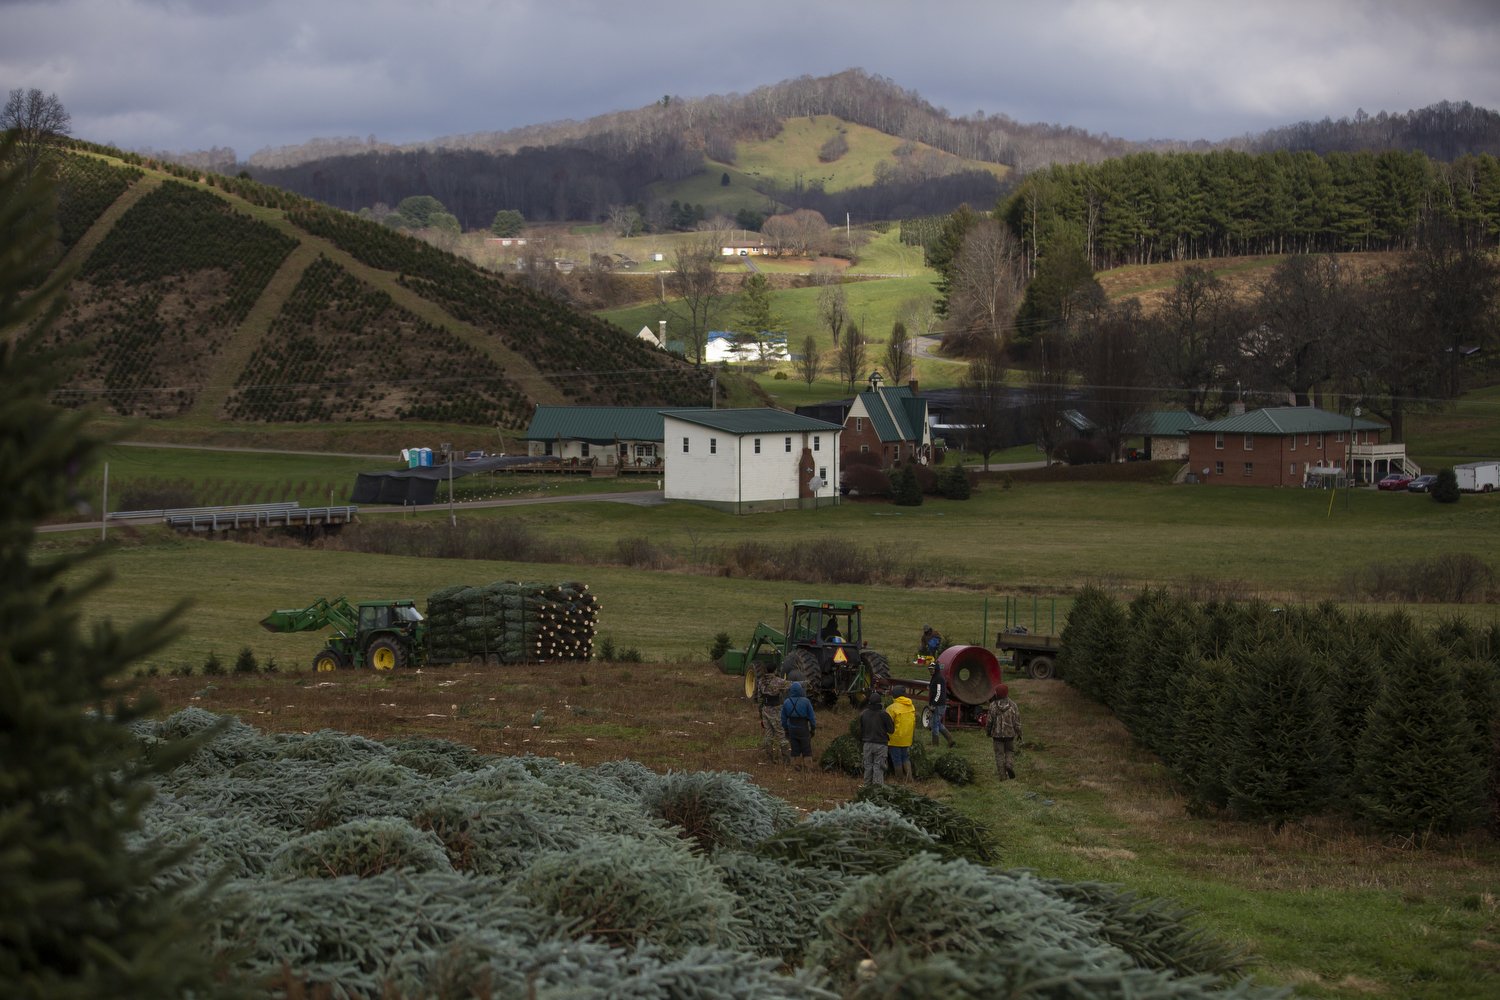  Hart-T-Tree Farms in Grassy Creek, North Carolina. The farm specializes in Fraser fir Christmas trees and sends them all over the country. McClain is also on the Ashe County Christmas Tree Association board. Ashe County produces the most Christmas t